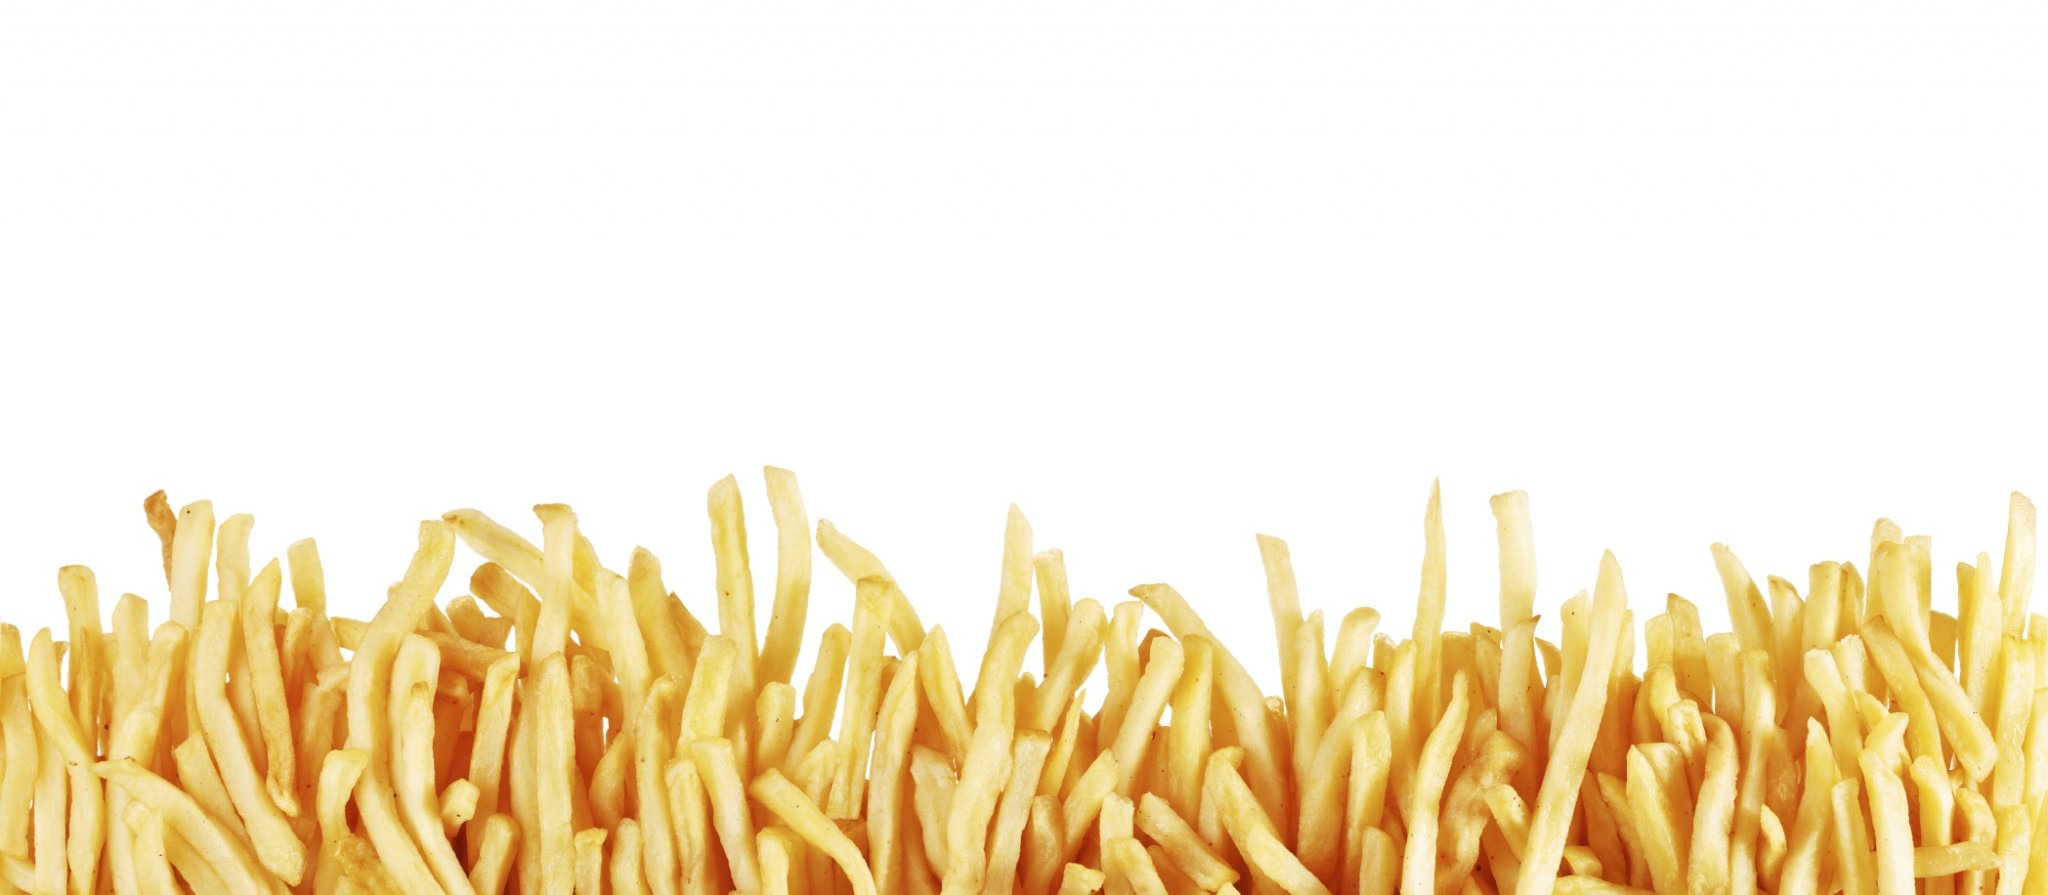 Weekly Economic News Roundup and soggy French fries